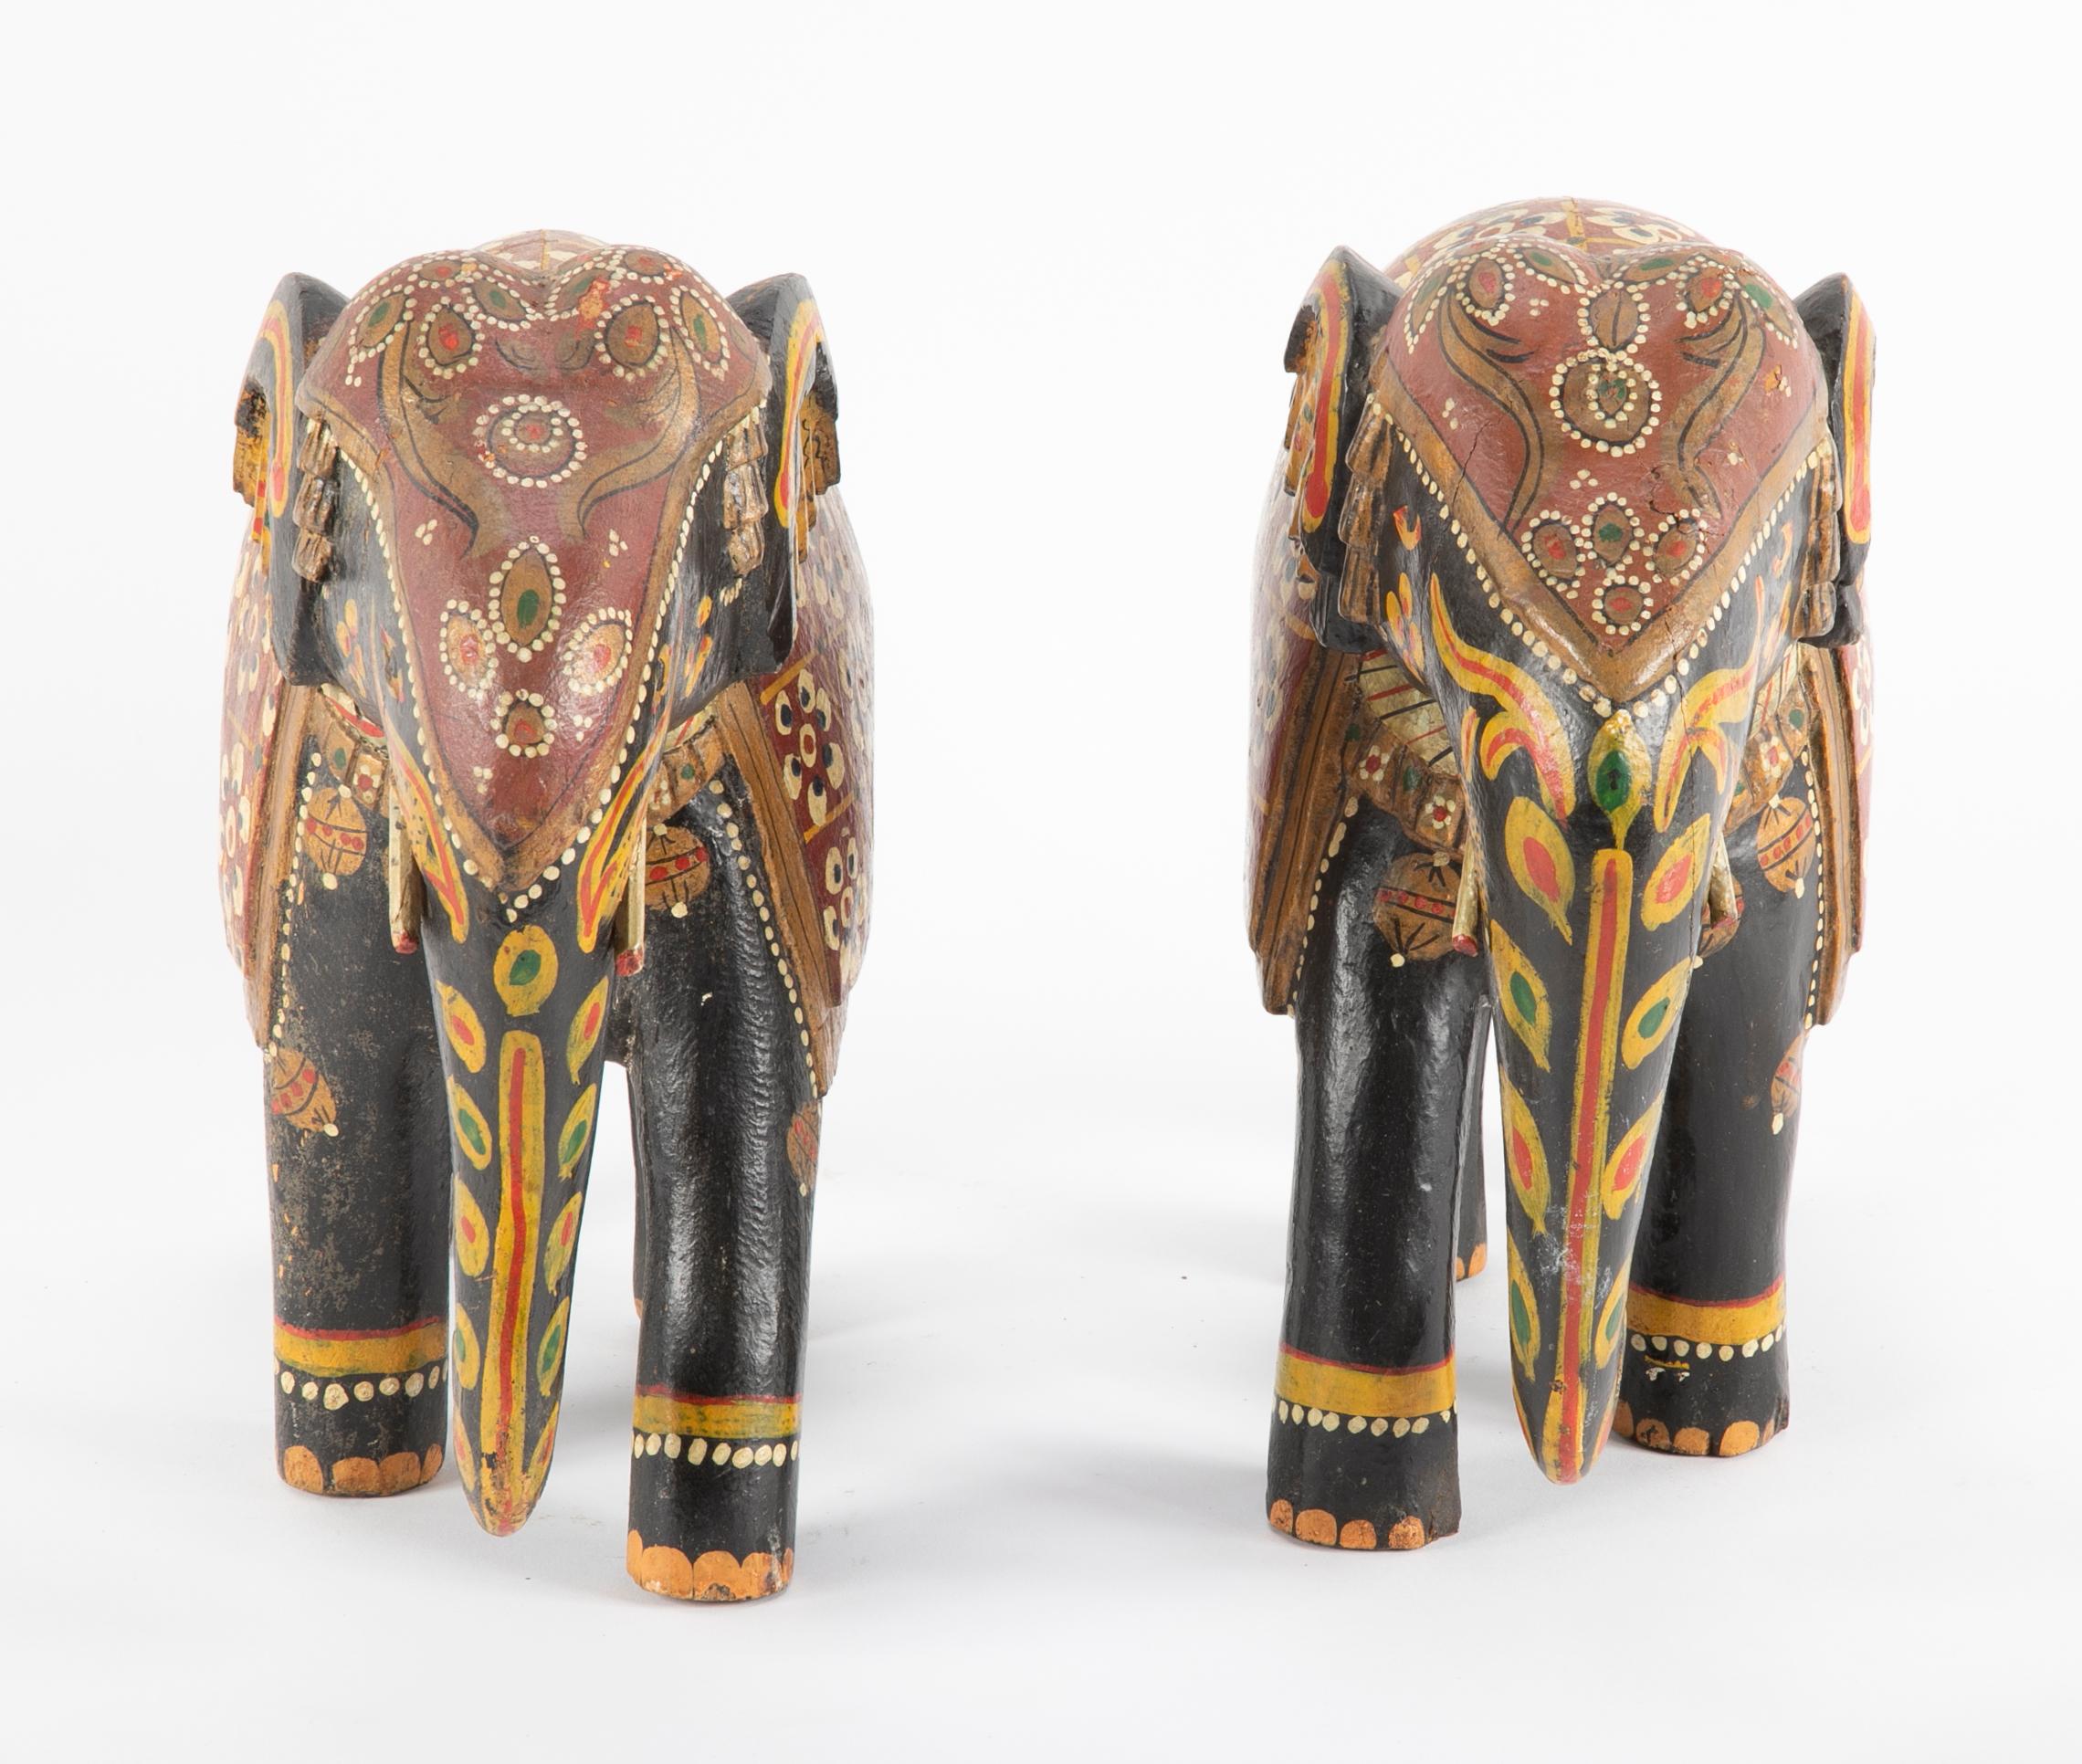 A wood carved pair of Asian elephants purchased in the 1930s,

circa 1920s-1930s. 

Measures: 11.5 H x 12.5 W x 4.5 D.